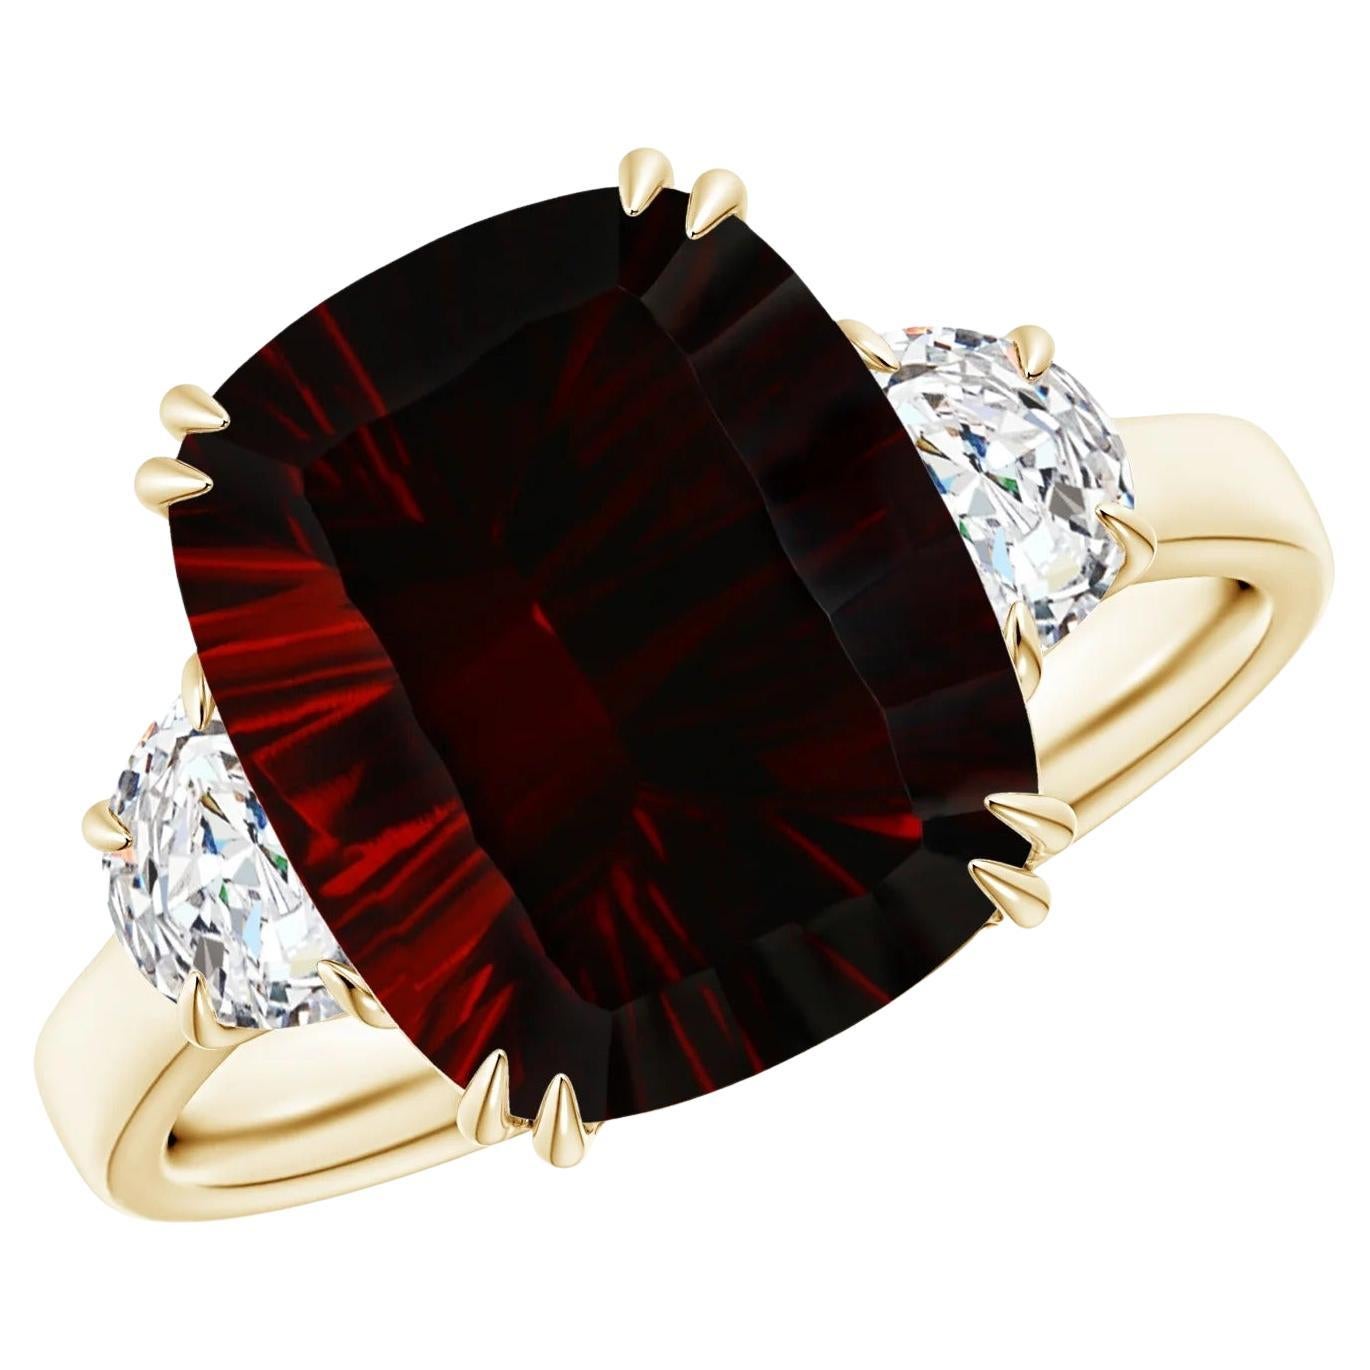 For Sale:  GIA Certified Natural Garnet Ring in Yellow Gold with Half Moon Diamonds